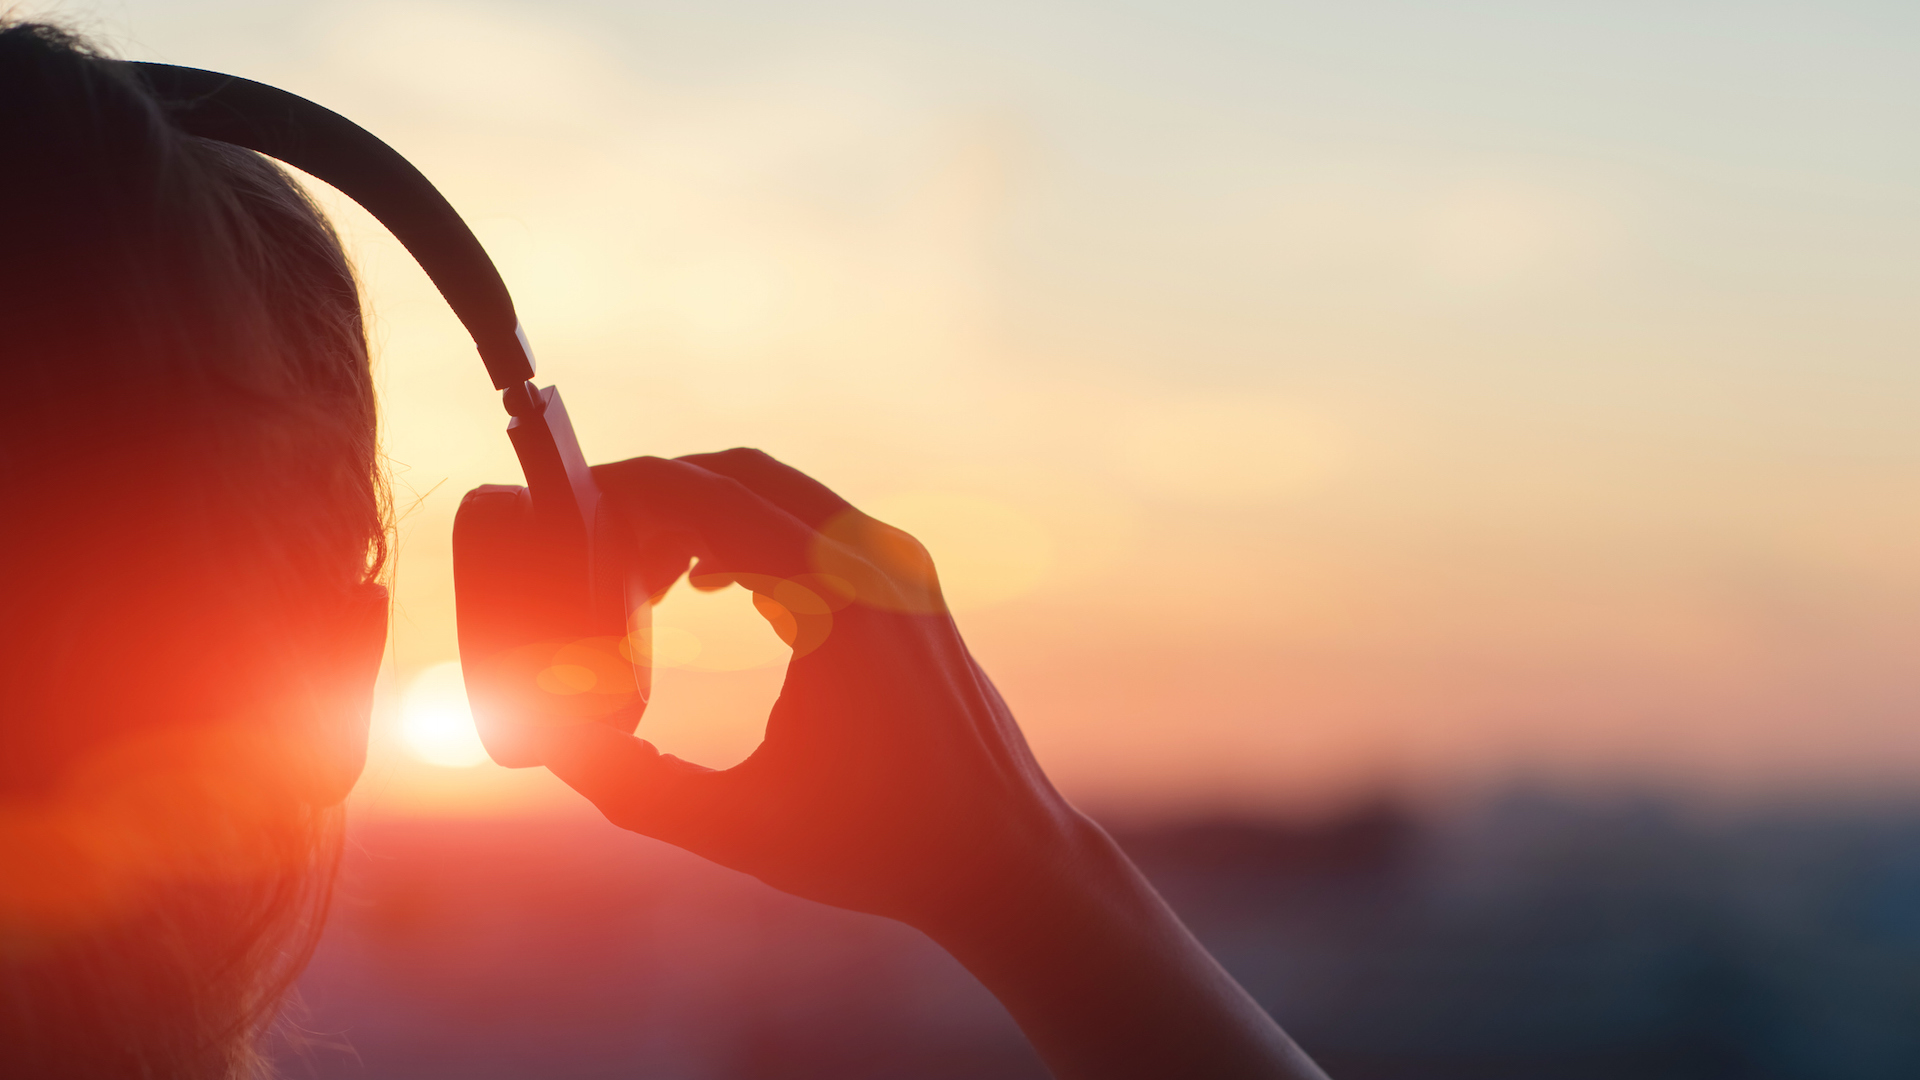 A person listening to music while the sun rises